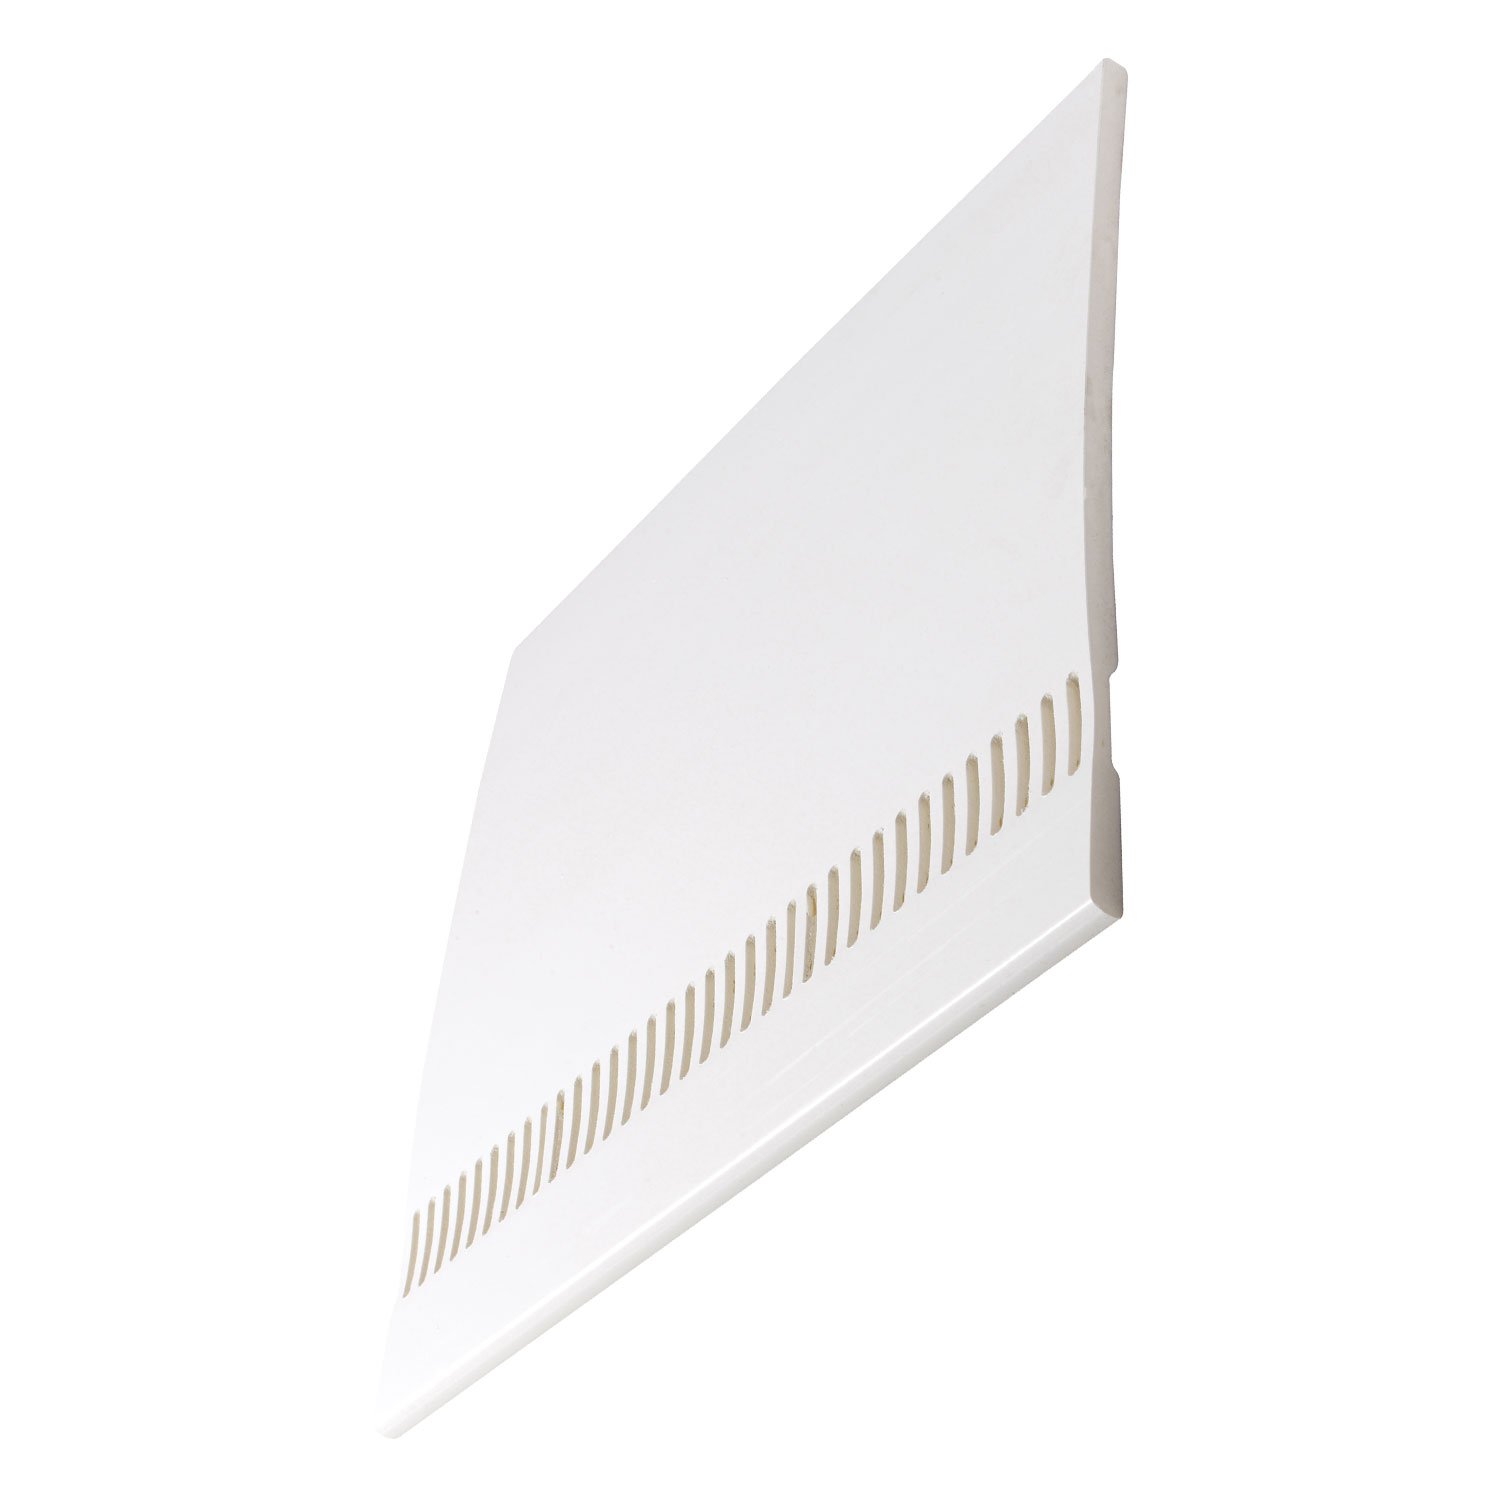 9mm White Vented Soffit Boards